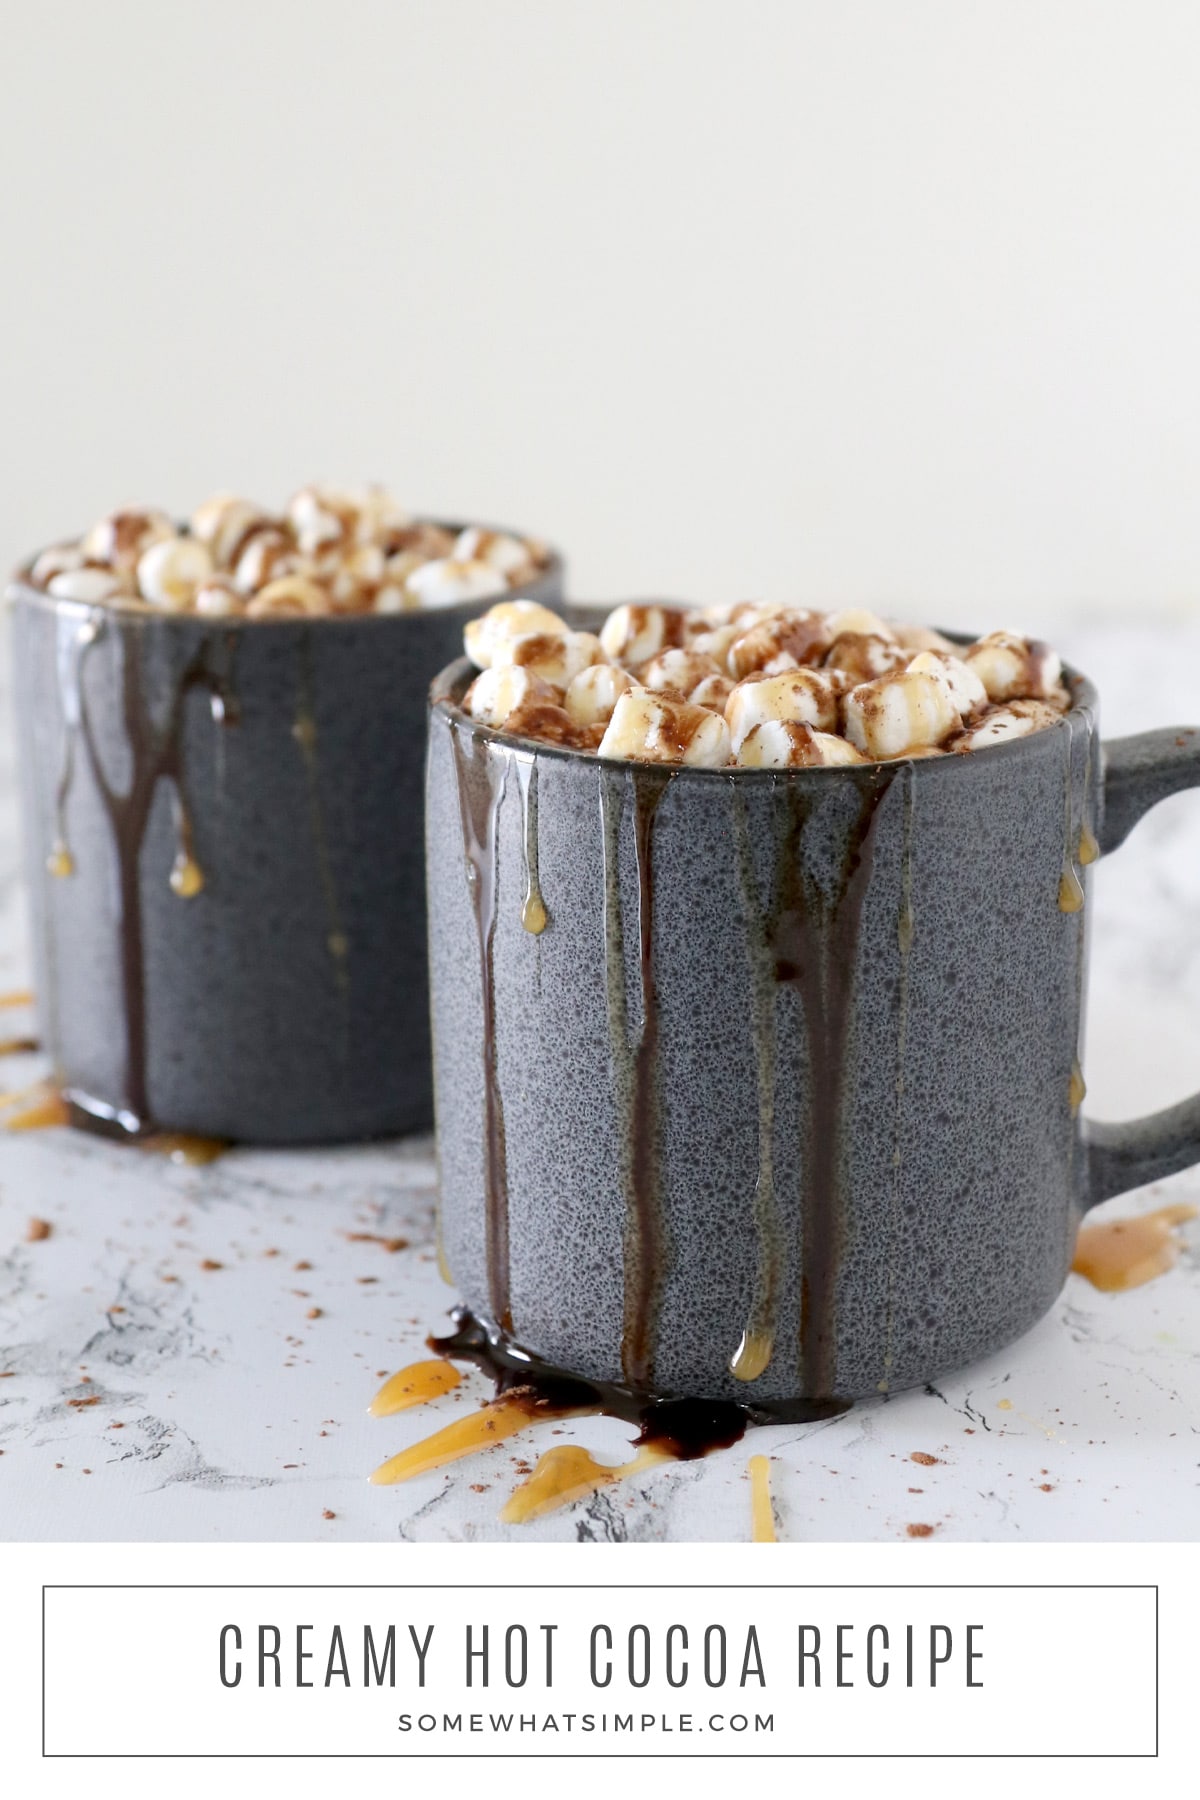 We’ve done the taste-testing and tinkering and we’ve discovered a hot chocolate recipe that tastes amazing and is so easy to make! Learn how to make this creamy hot chocolate in five easy steps. via @somewhatsimple